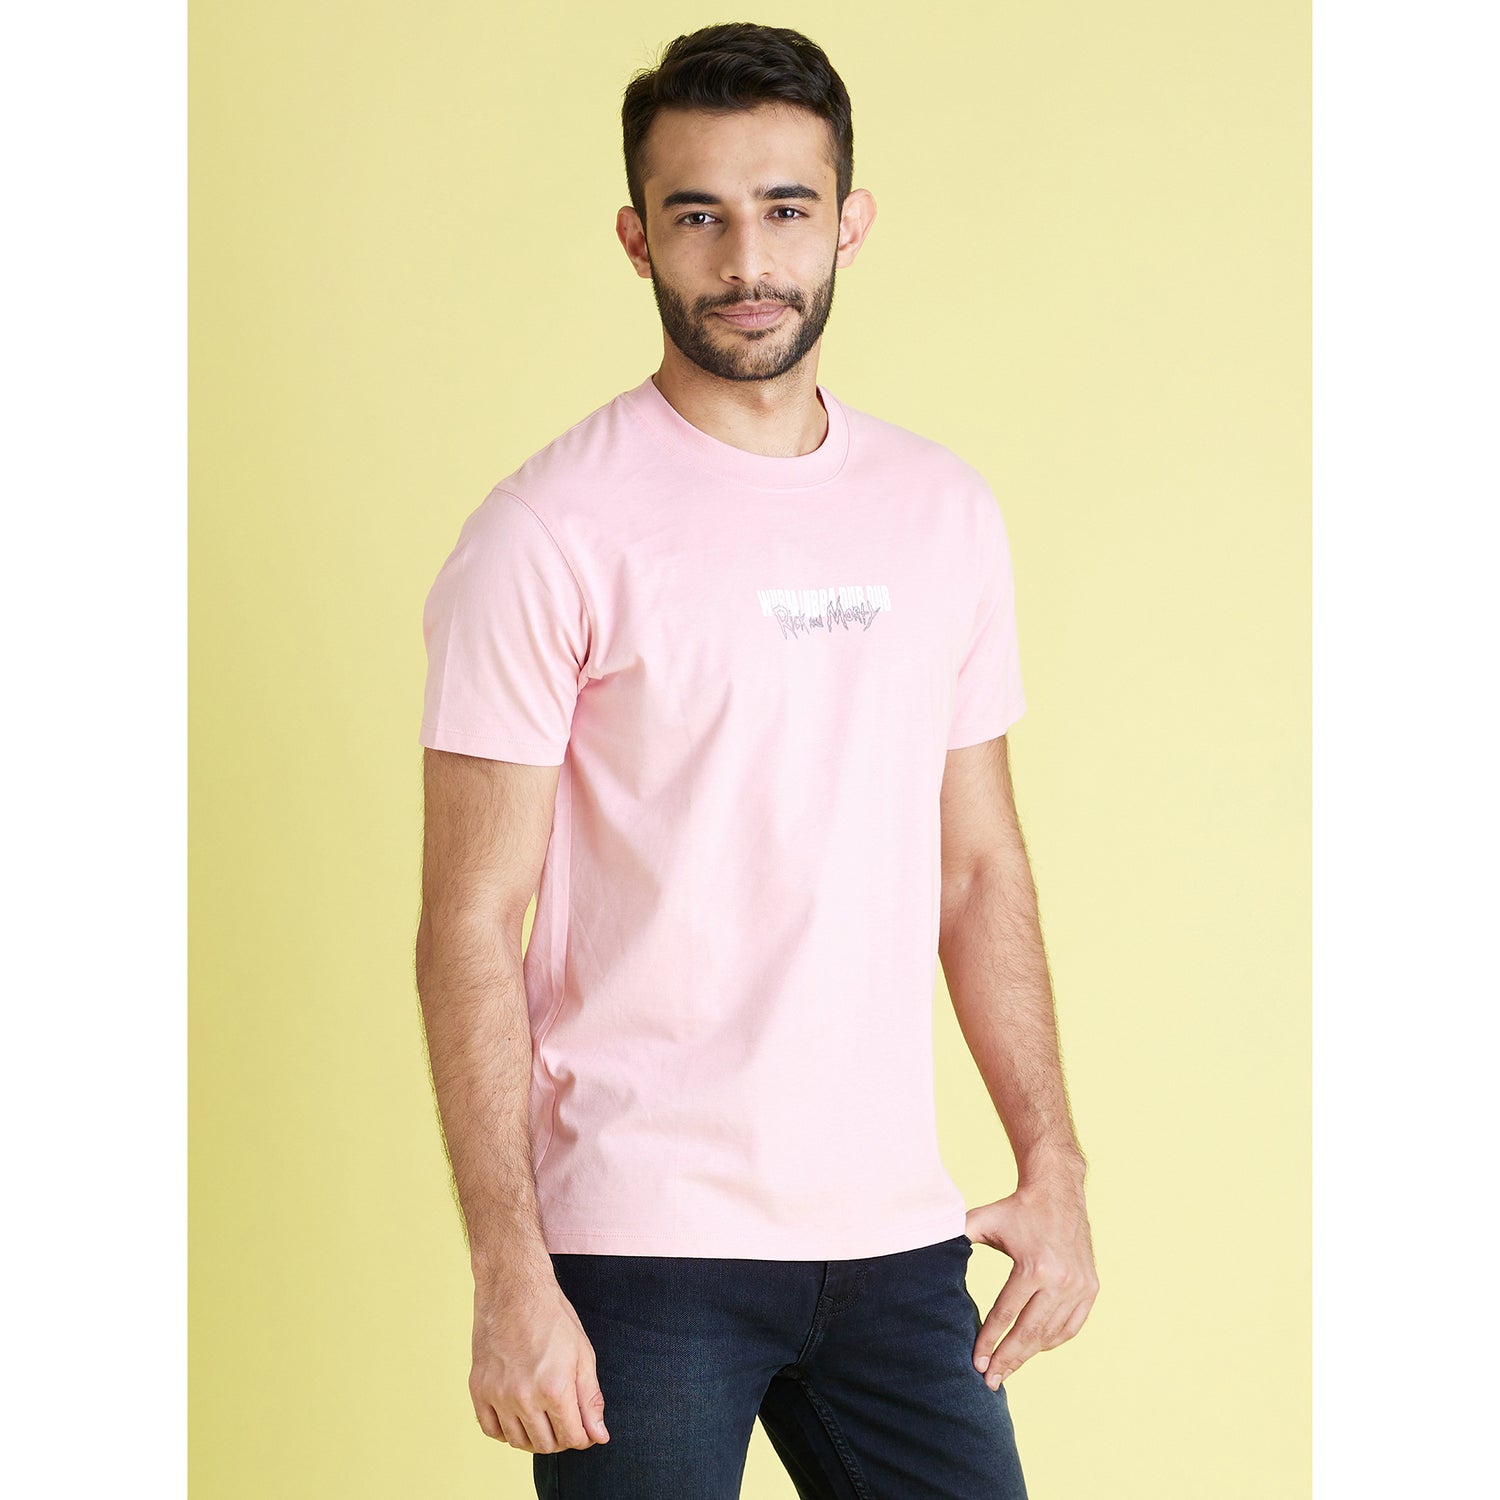 Rick and Morty - Pink Printed Cotton T-shirt (LCEMORTY1)